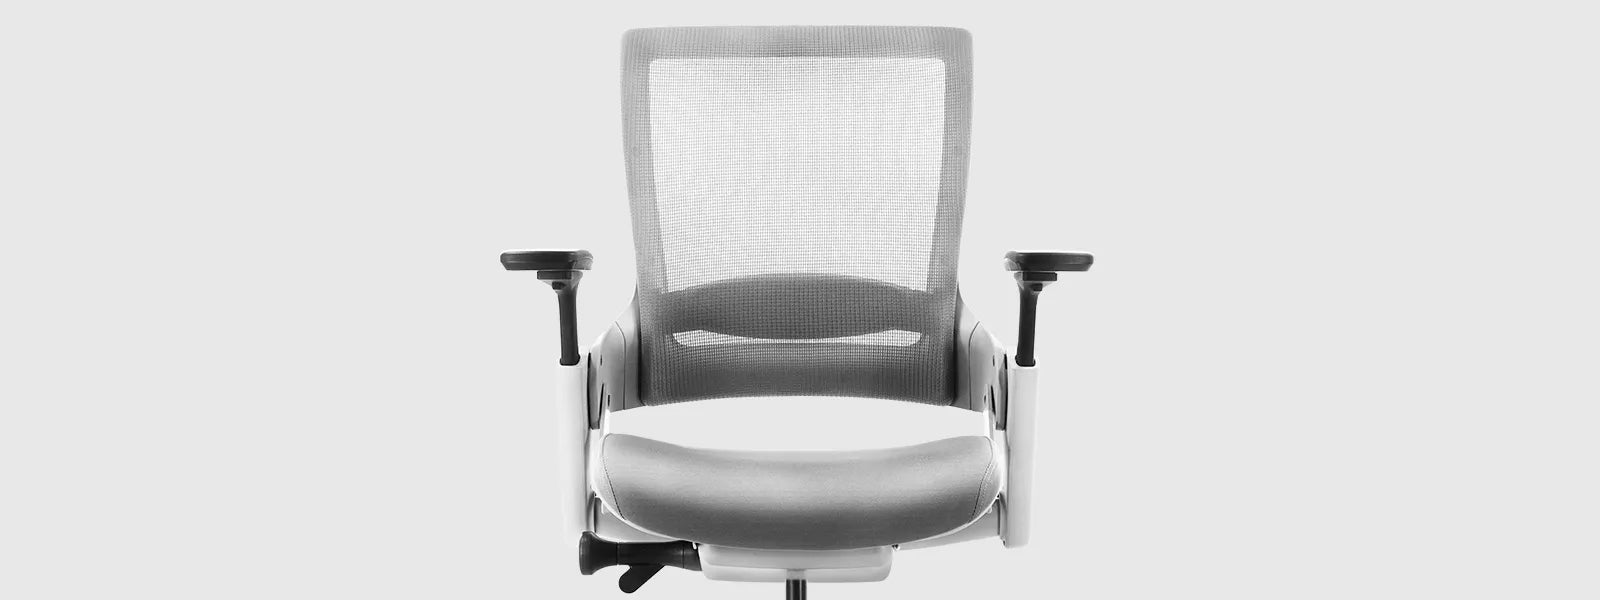 Close-up of the Flujo Angulo Chair showcasing its high-quality mesh back and ergonomic armrests in a professional setting.